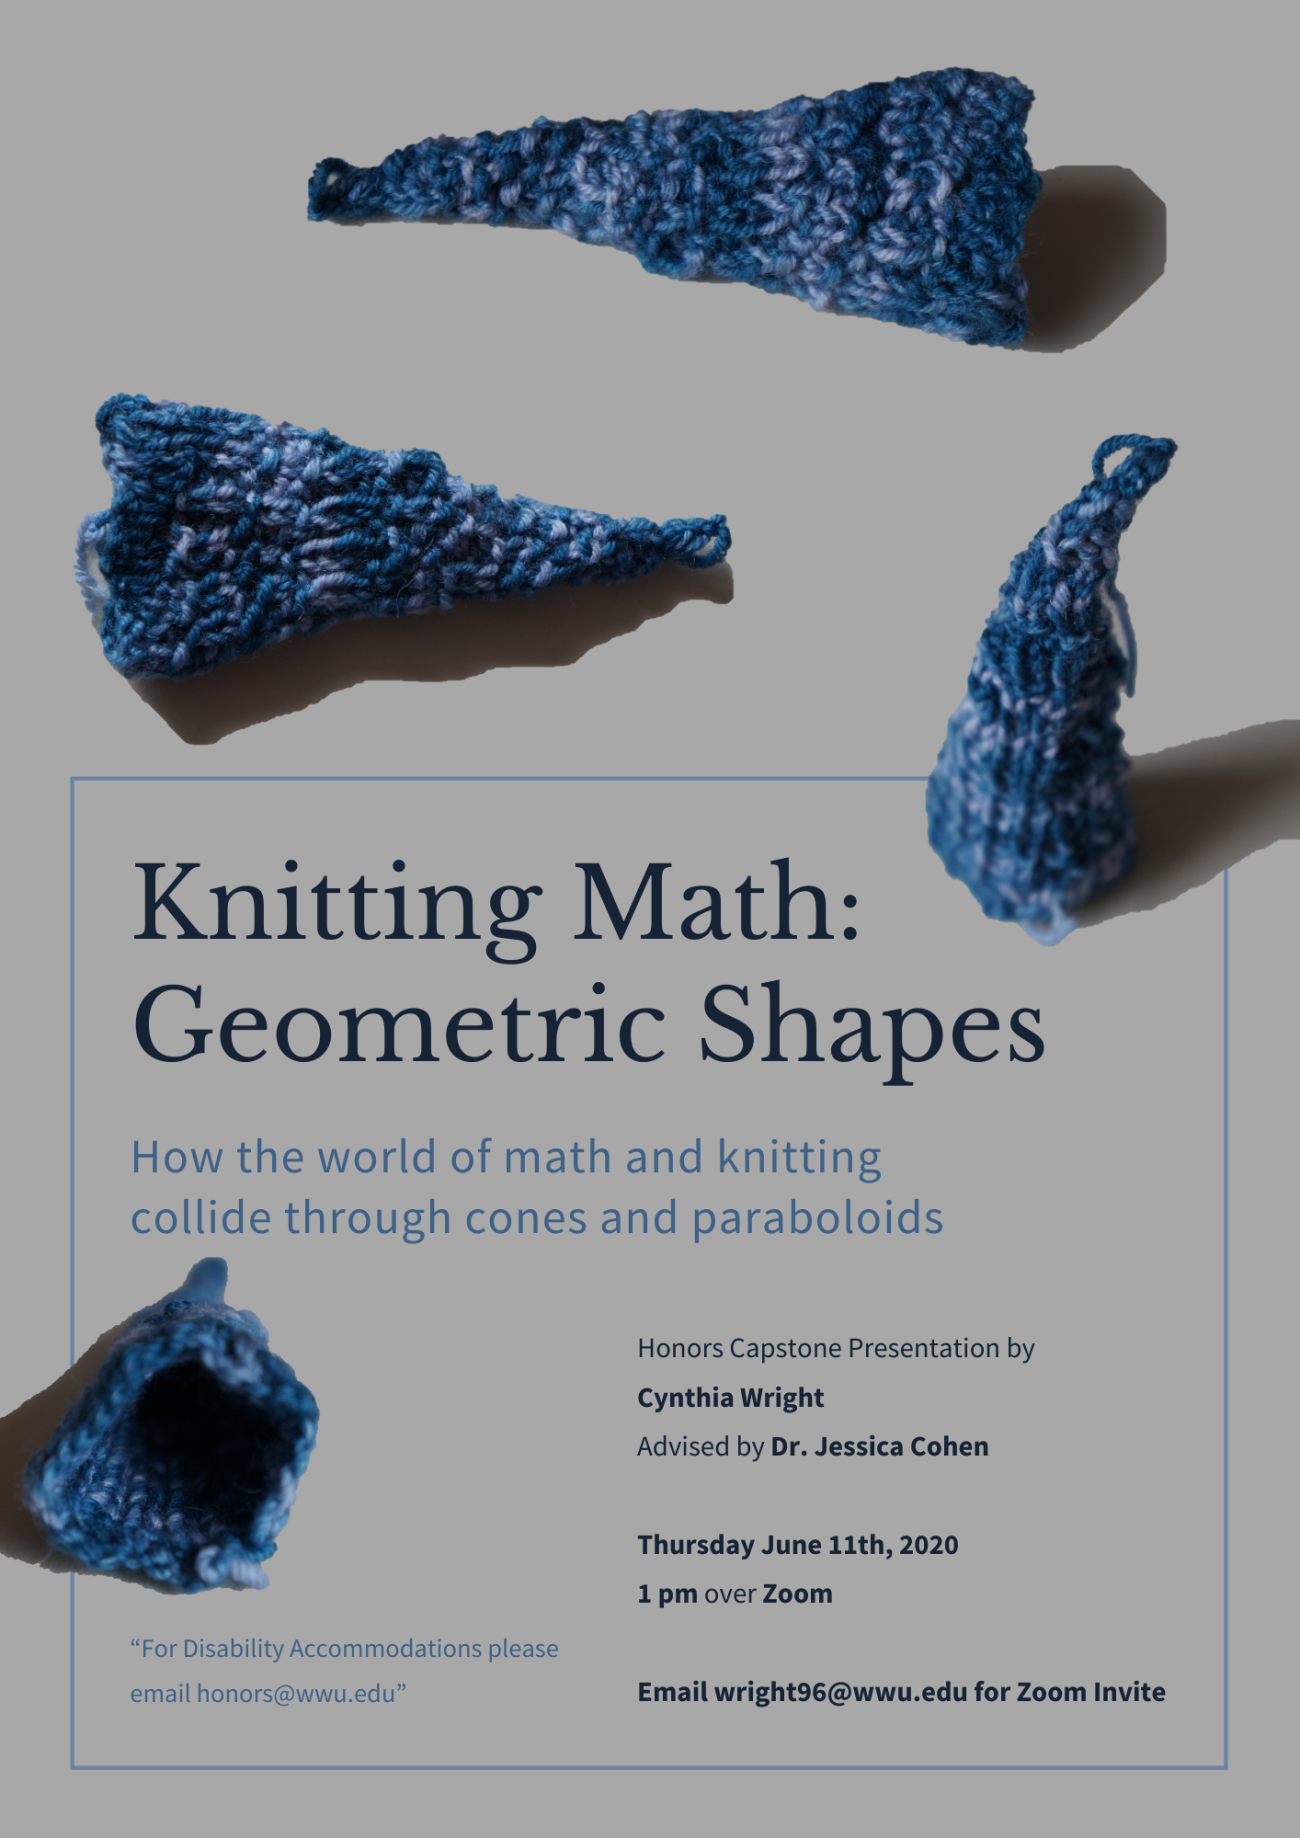 Neutral grey background with 4 pictures of blue, knitted cones from different angles. Top of poster shows the length of two blue knitted cones. The middle right shows the cone standing up as if on a table. The middle left shows the knitted cone as if looking into the circular opening. Text reads "Knitting Math: Geometric Shapes". Subheading reads "How the world of math and knitting collide through cones and paraboloids" "Honors Capstone Presentation by Cynthia Wright, Advised by Dr. Jessica Cohen"